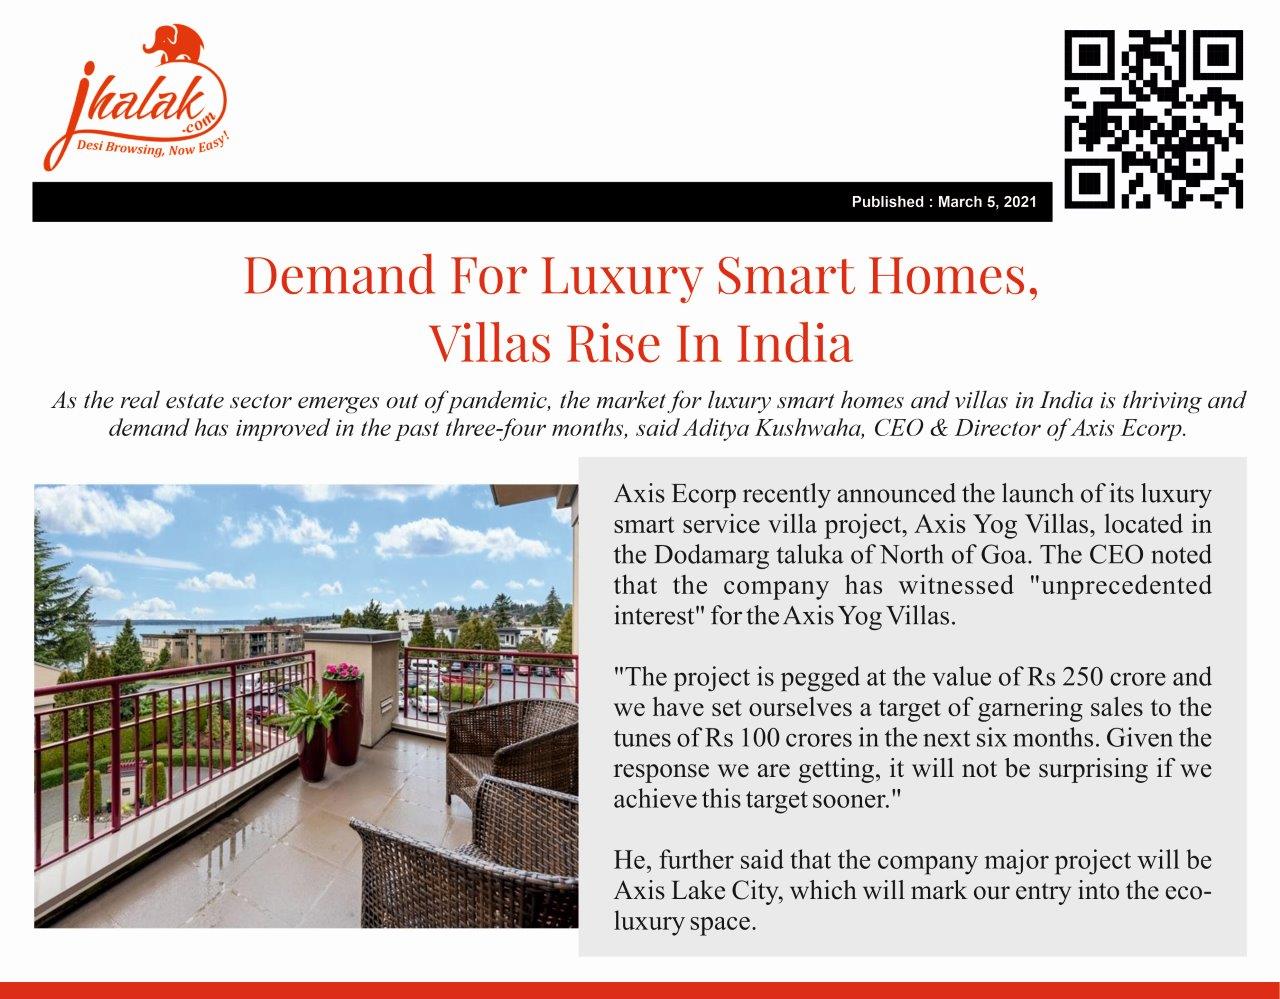 Demand for luxury smart homes, villas rise in India